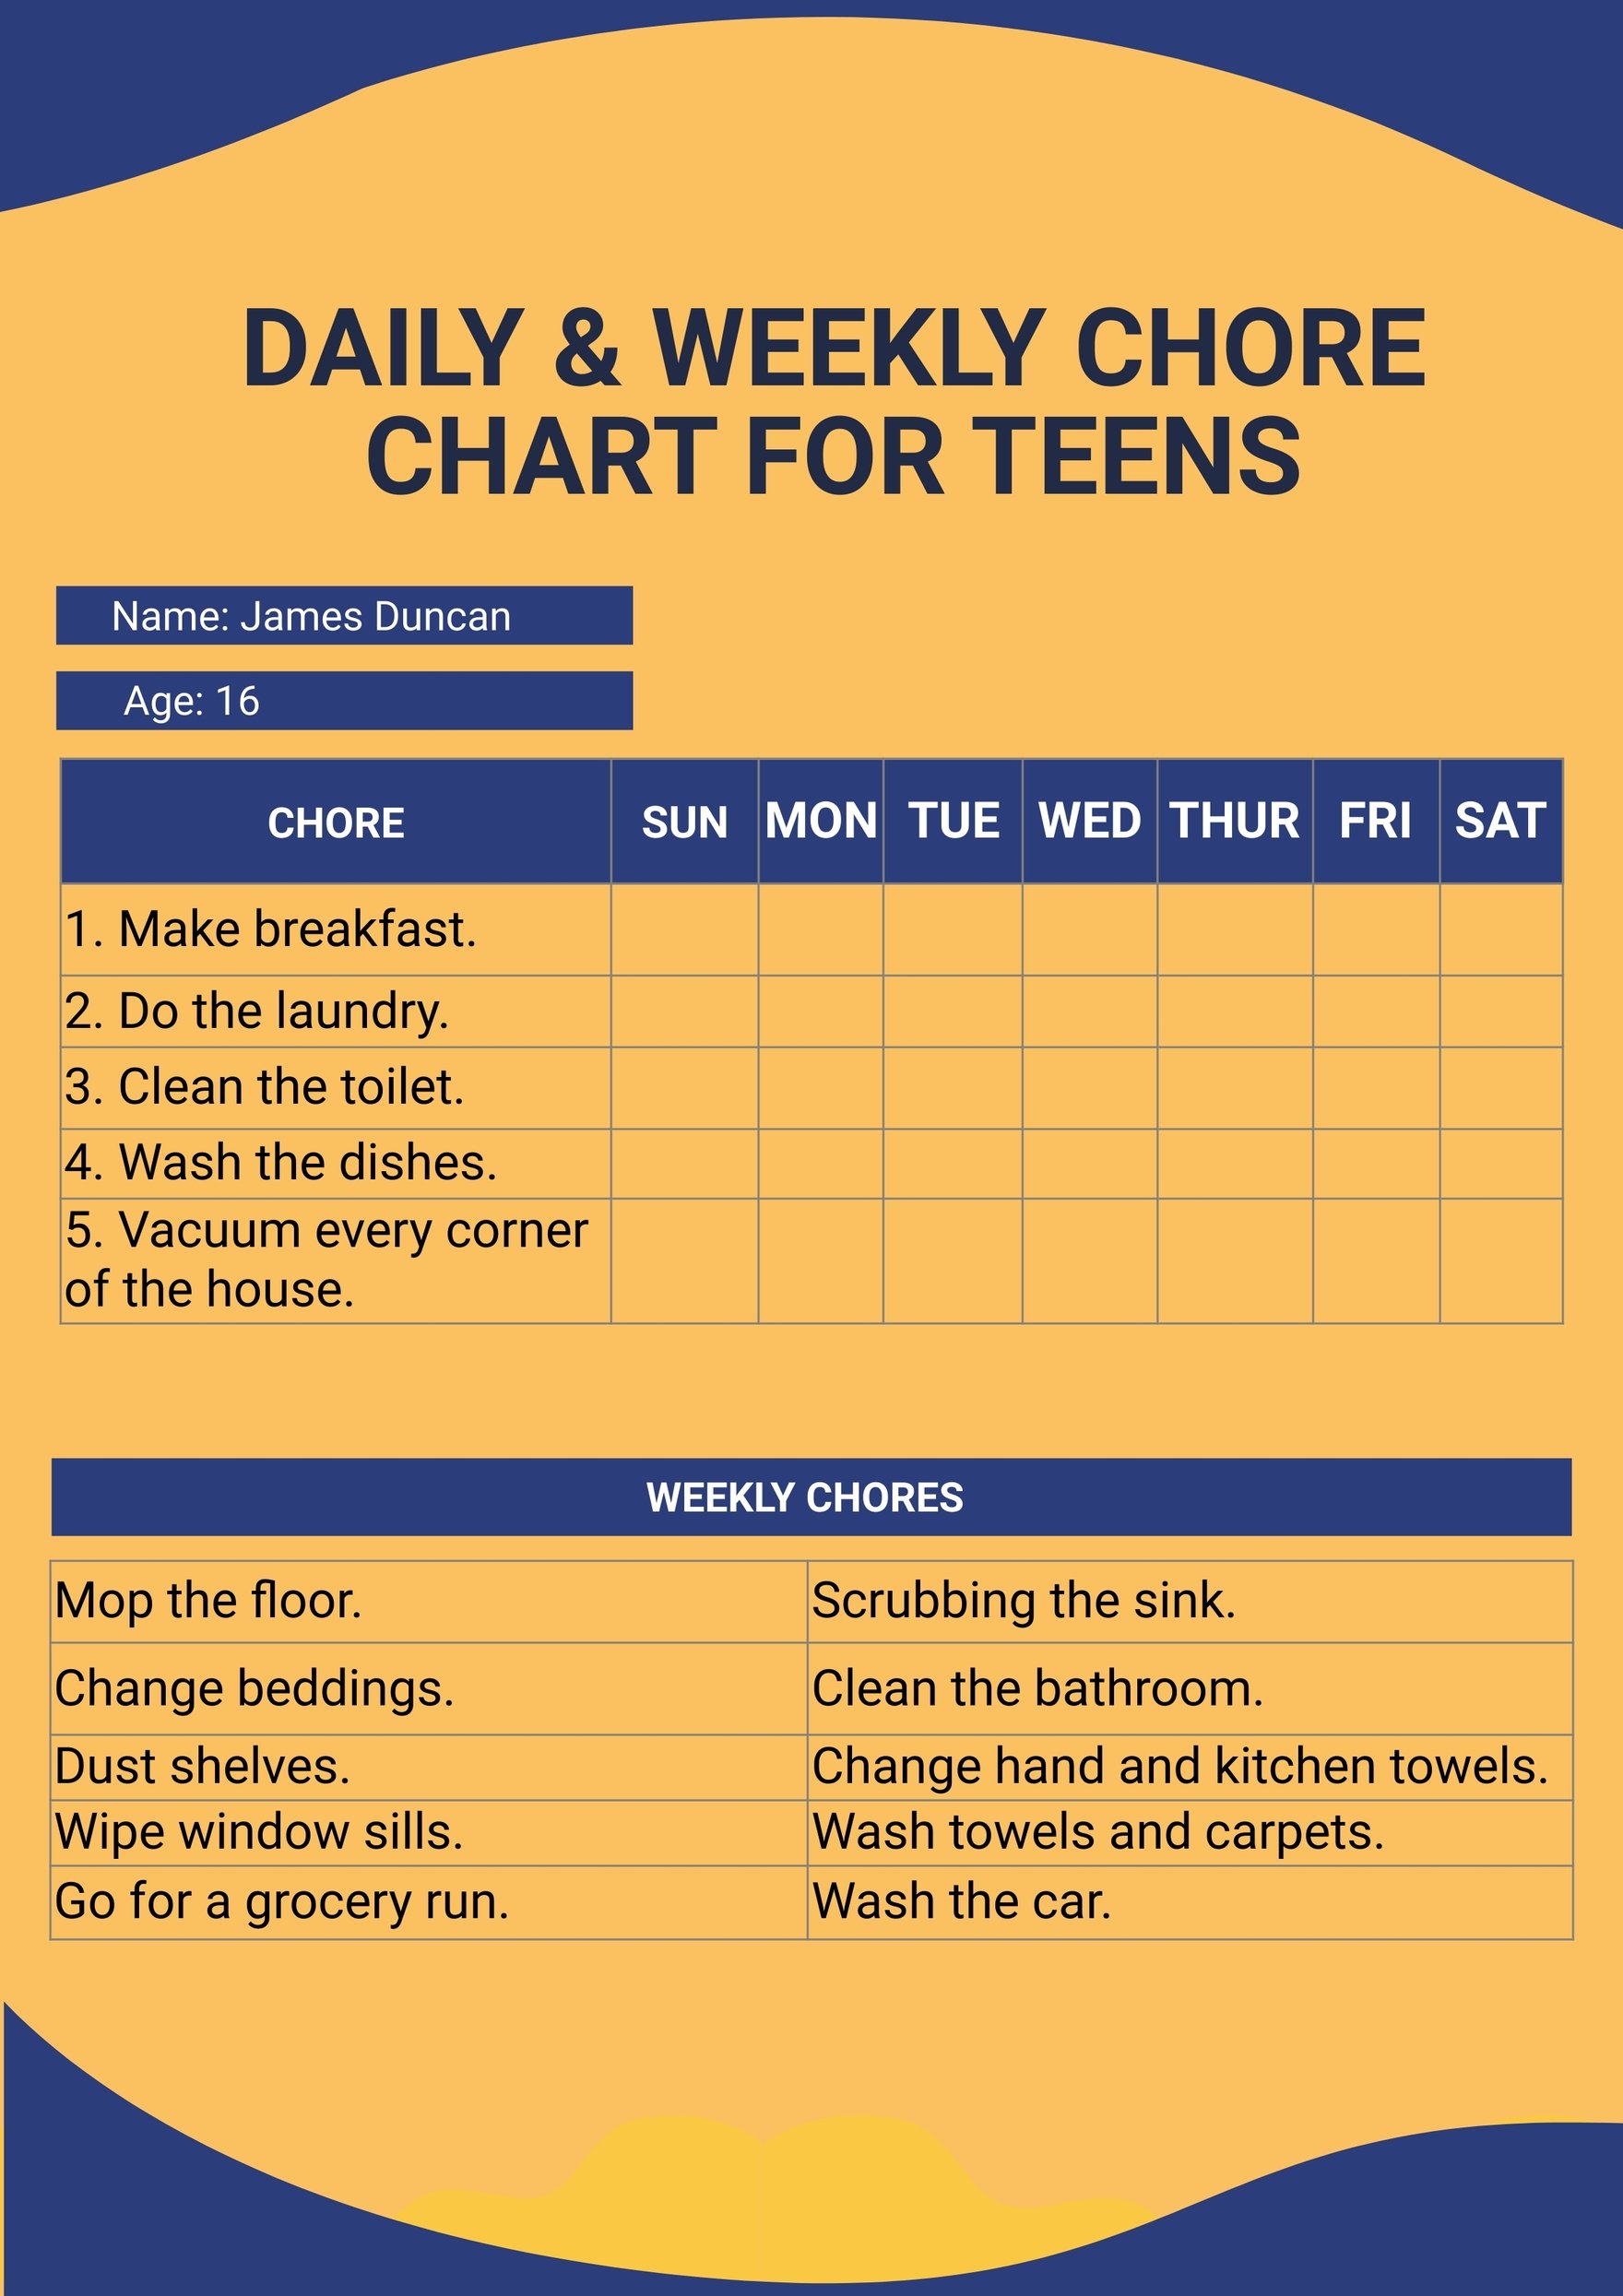 Daily & Weekly Chore Chart For Teens